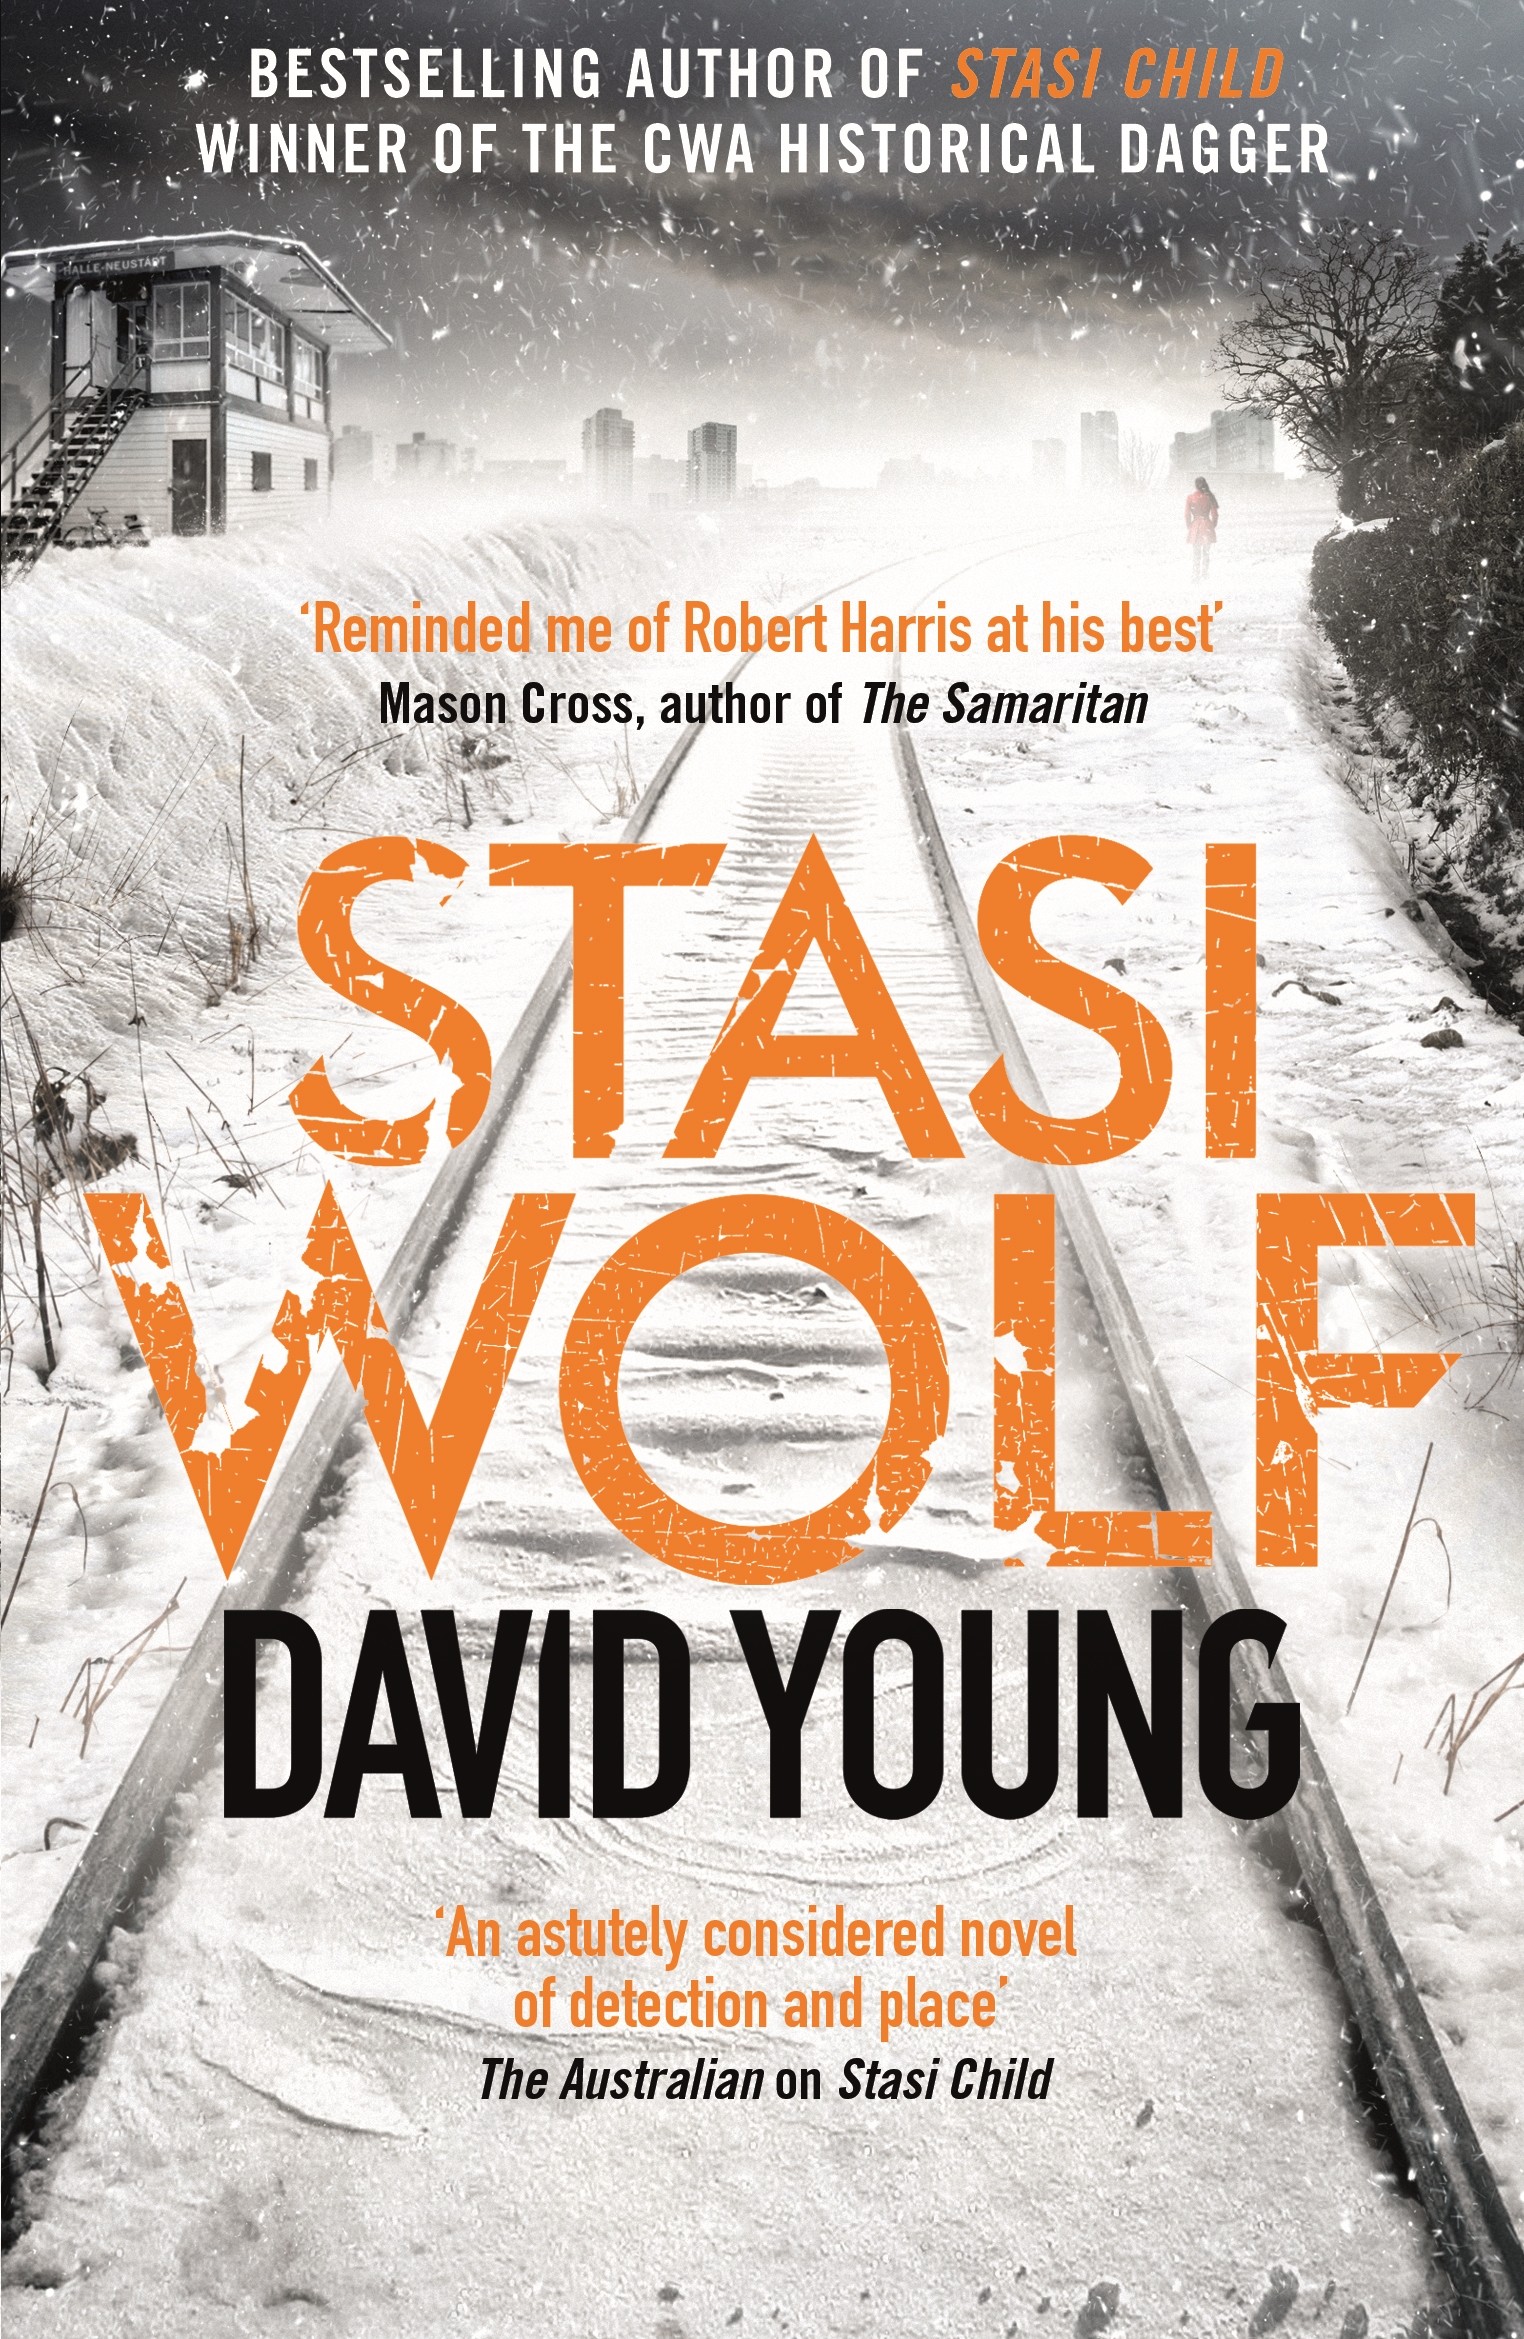 Front cover of Stasi Wolf, the new crime novel by David Young set in East Germany